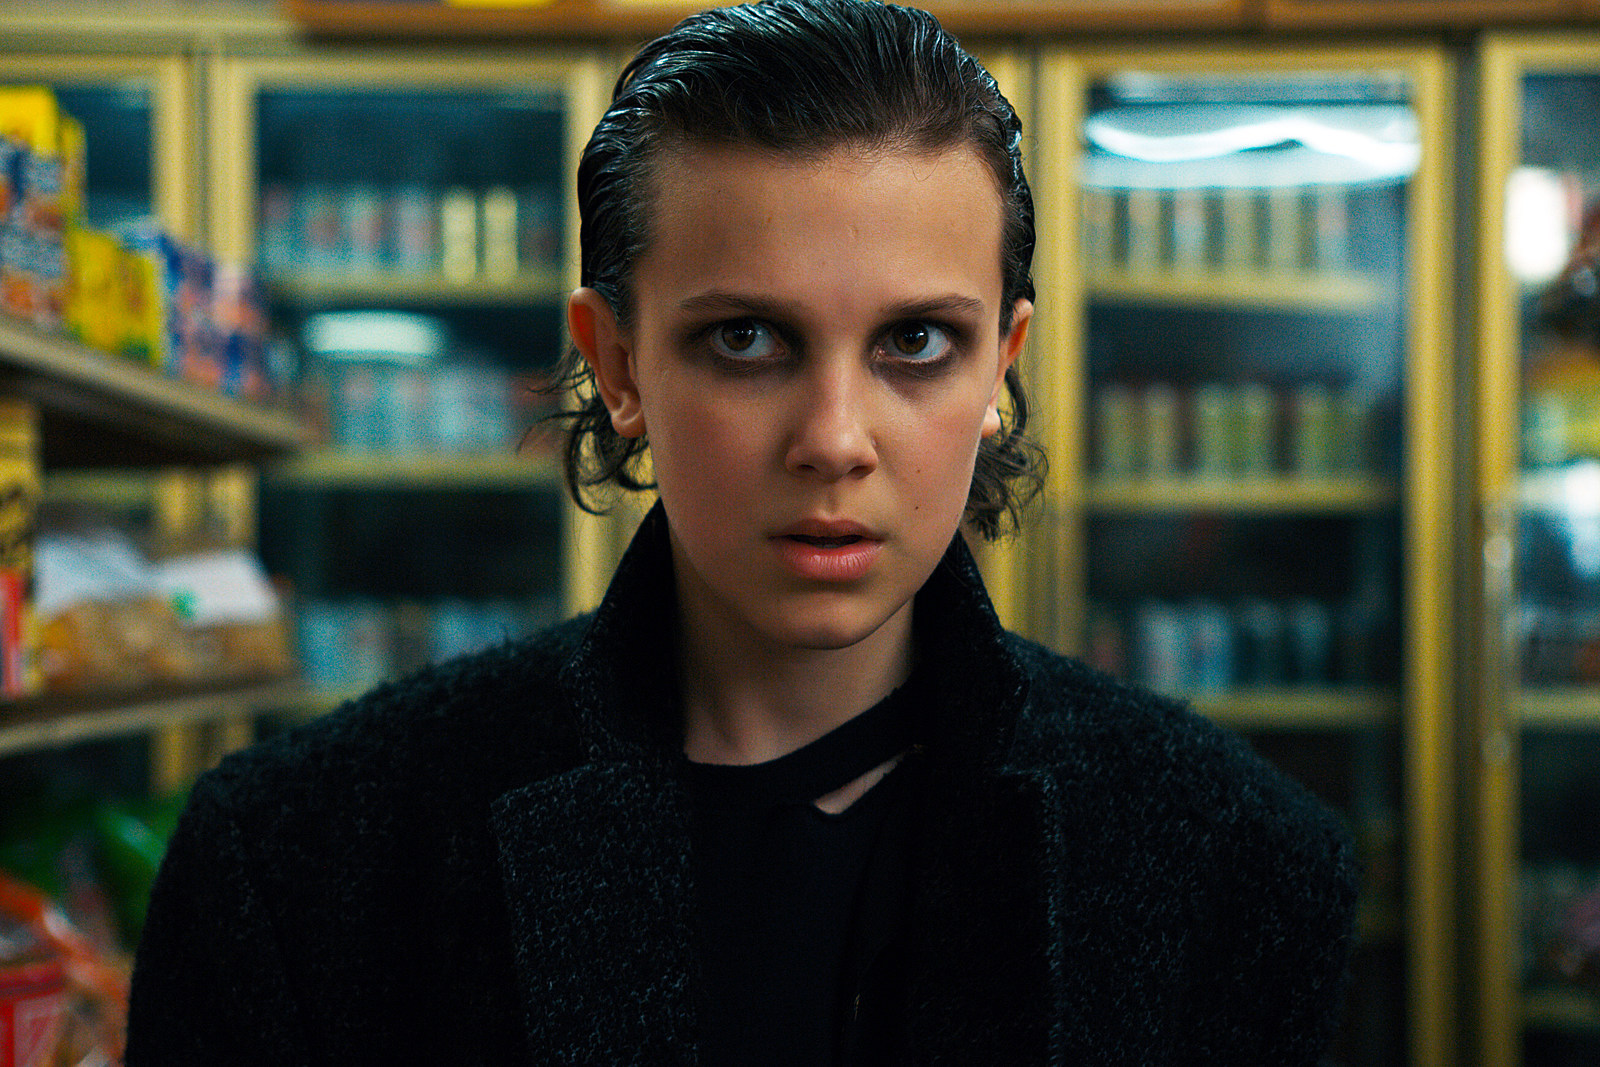 How Well Do You Know “Stranger Things” Season 2? Eleven Stranger Things